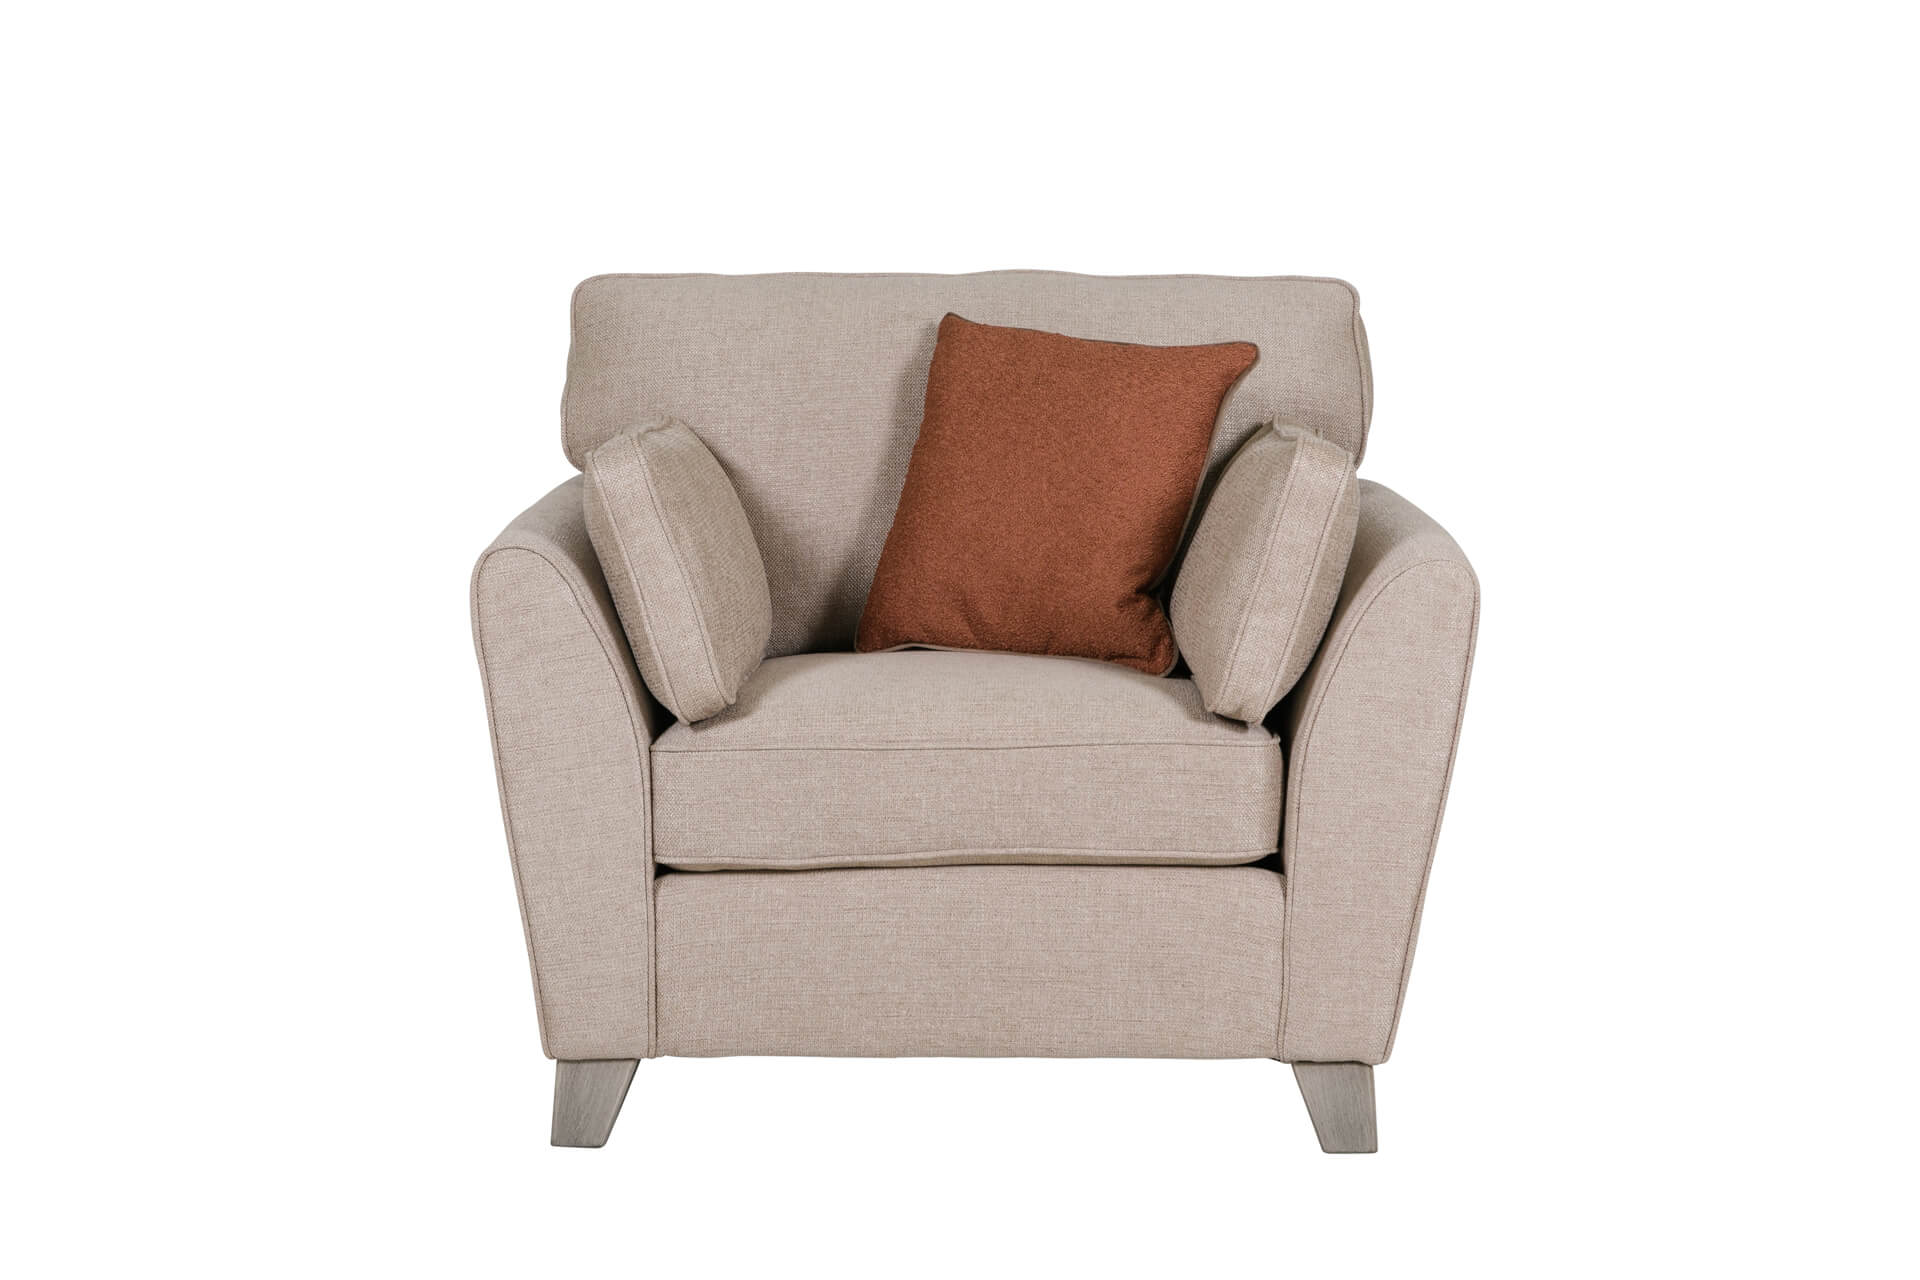 Cromwell Biscuit Linen Fabric Sofa